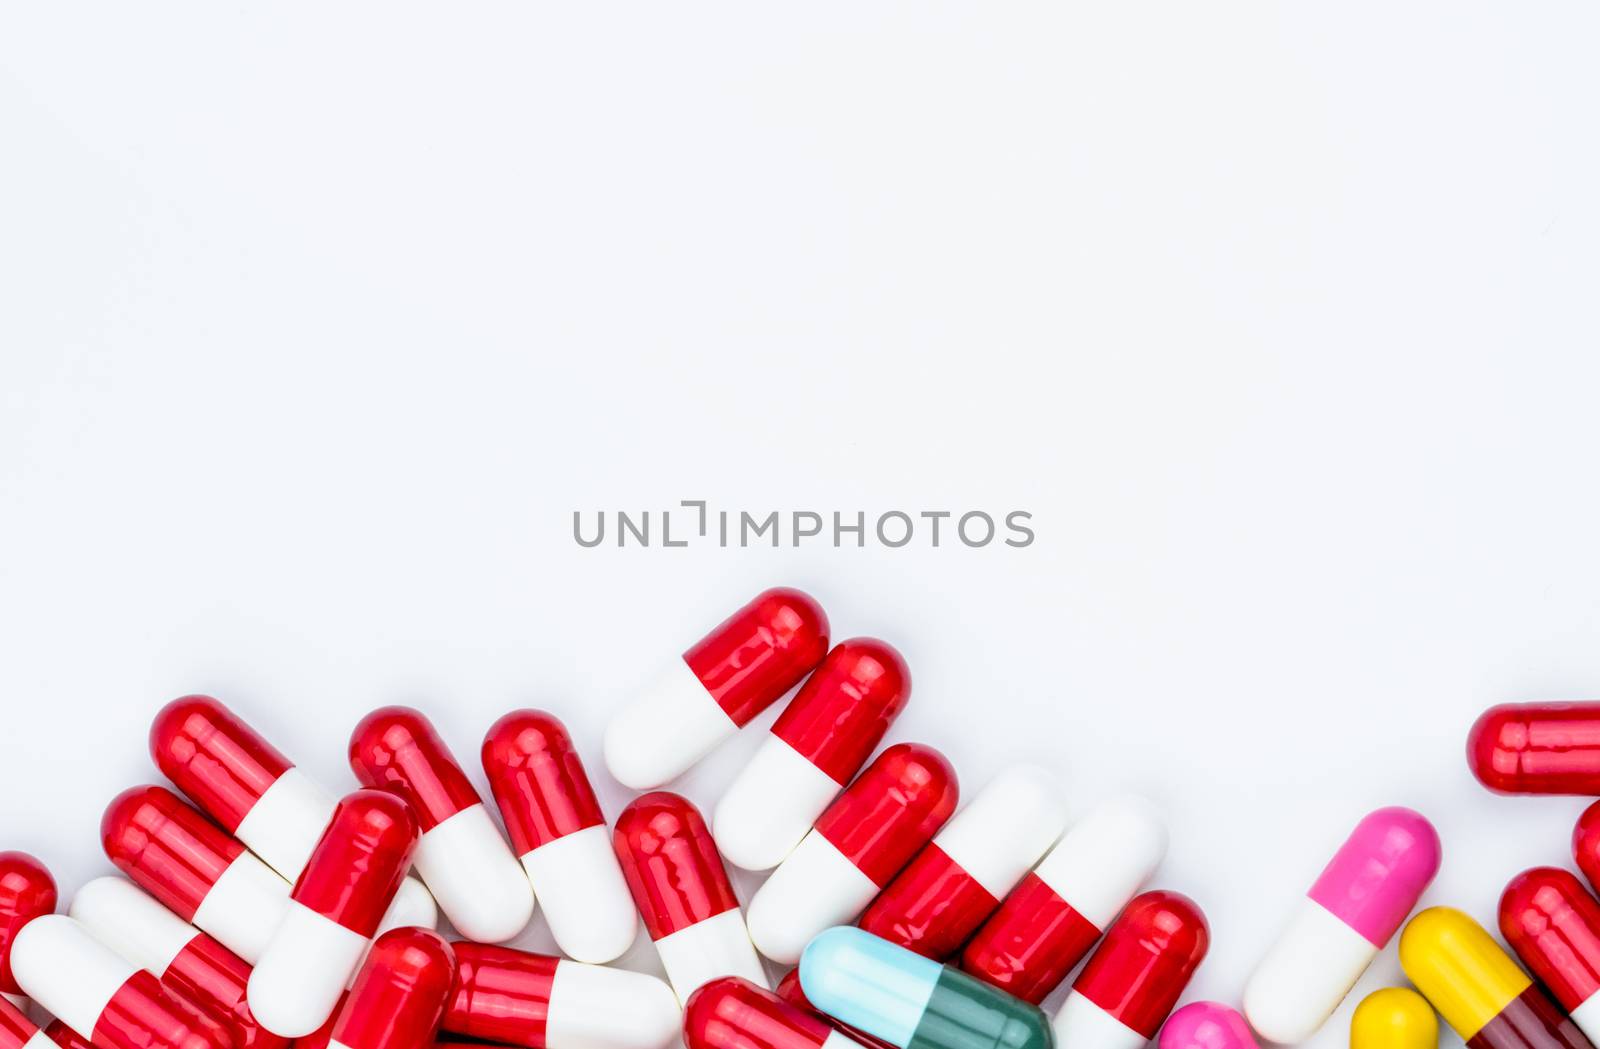 Colorful of antibiotic capsules pills isolated on white background with copy space. Drug resistance concept. Antibiotics drug use with reasonable and global healthcare concept. Pharmaceutical industry. Pharmacy background. by Fahroni